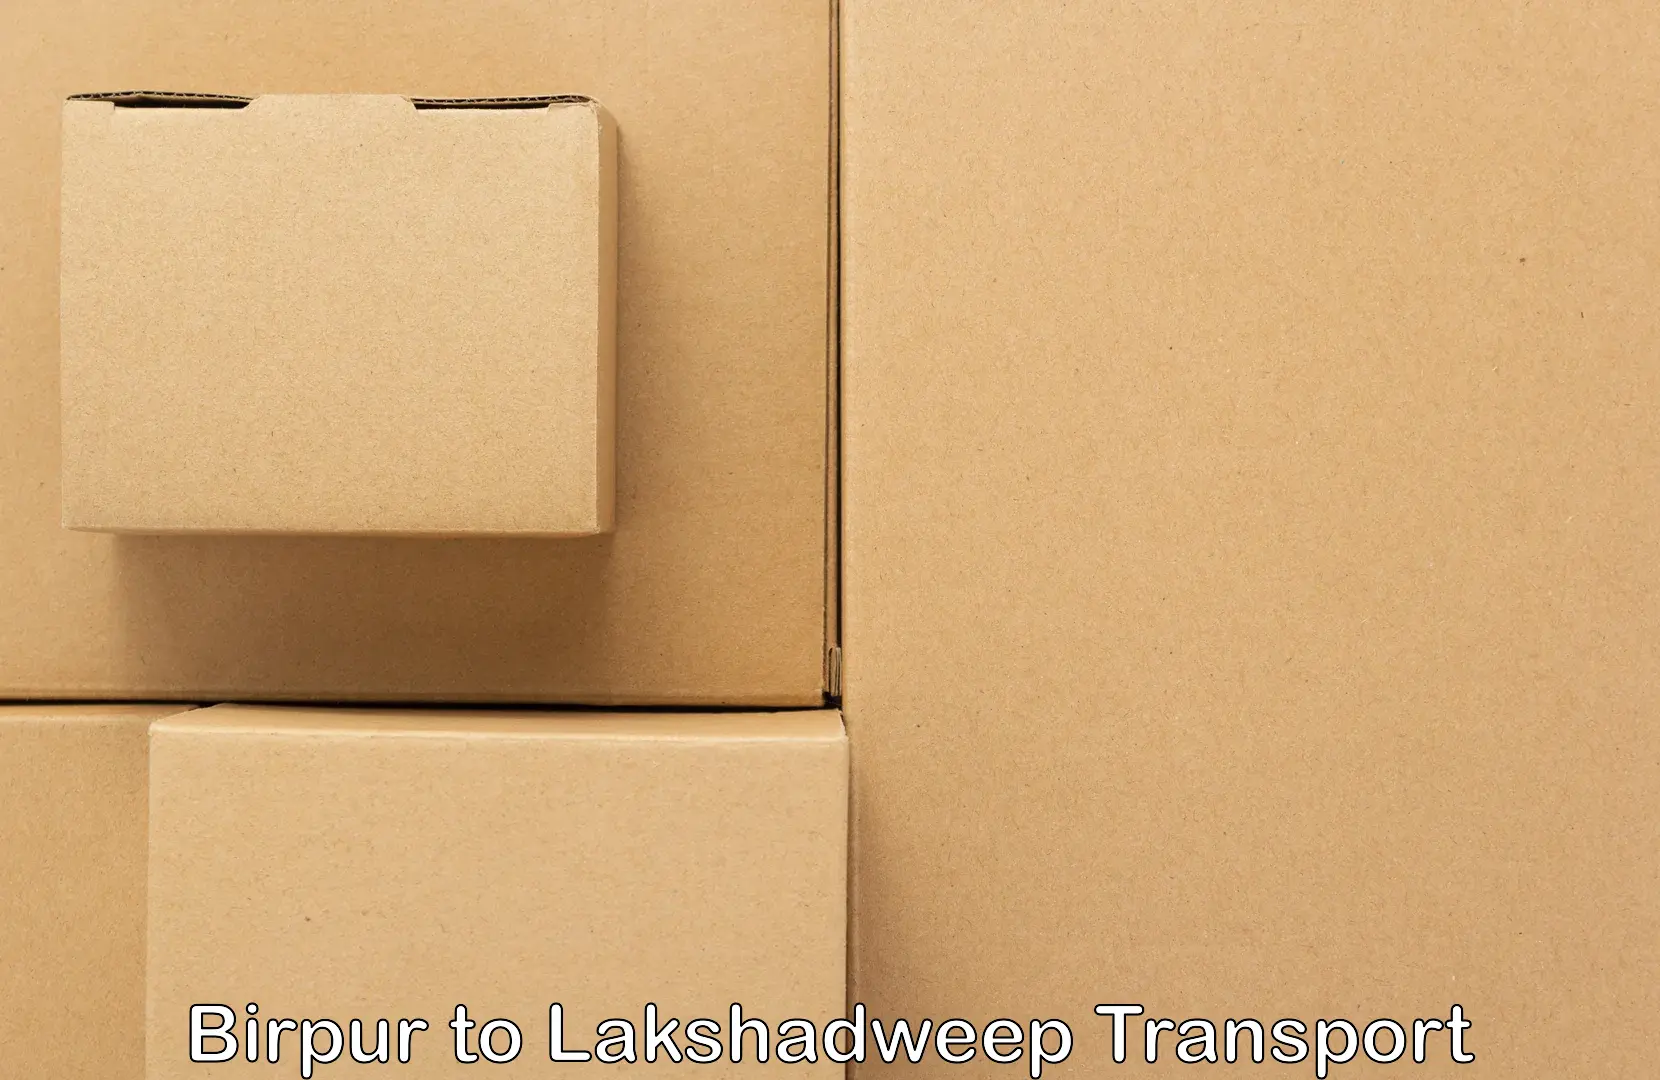 Delivery service Birpur to Lakshadweep